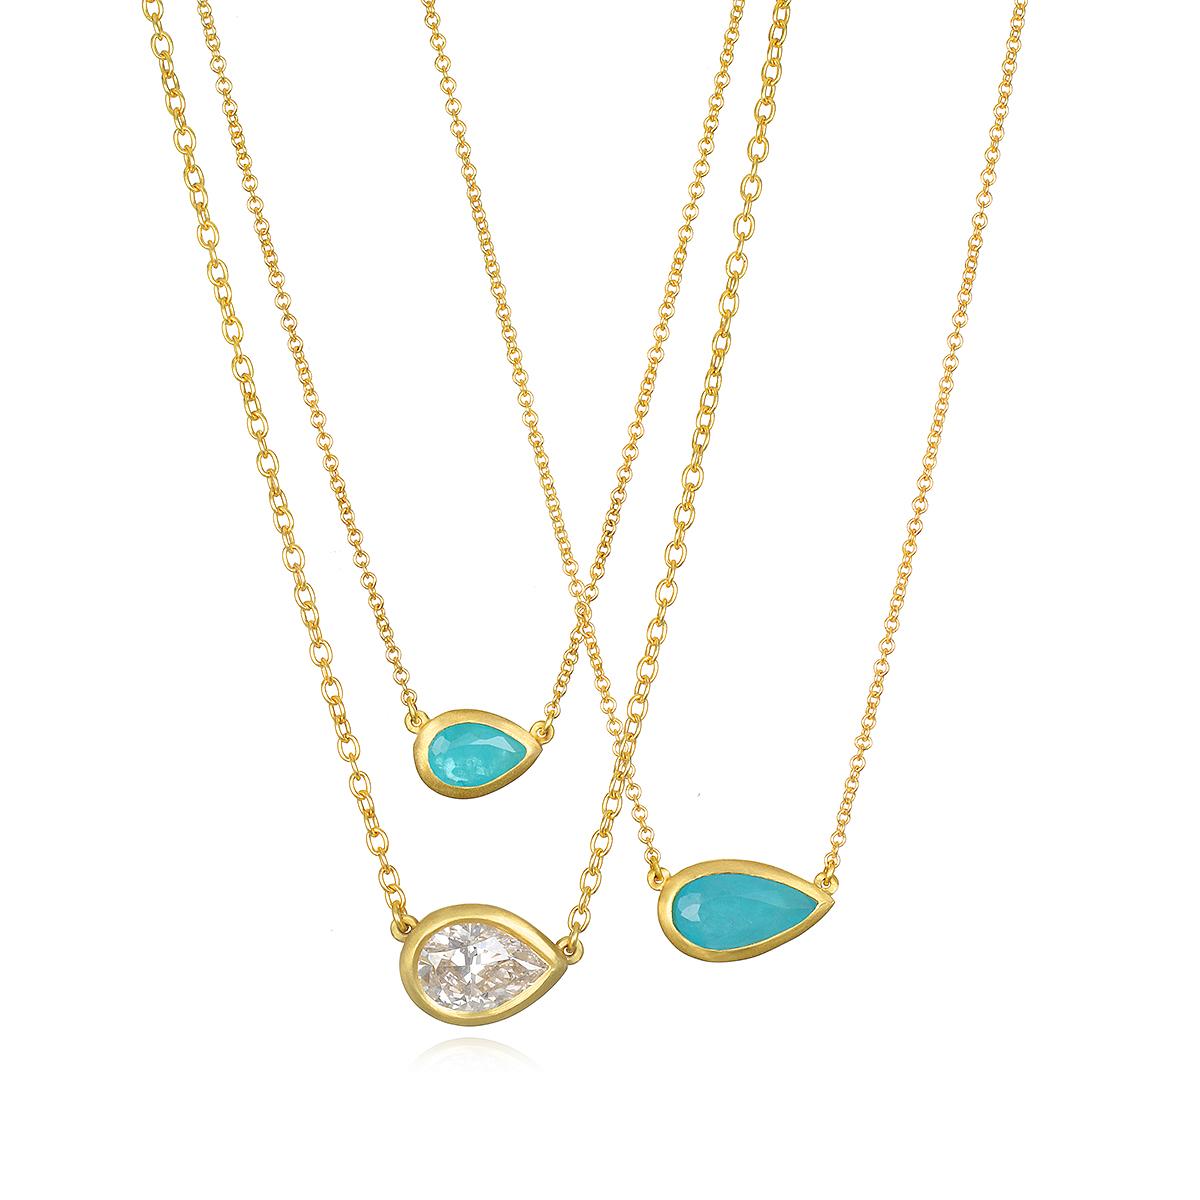 Faye Kim's 18K gold* Paraiba Tourmaline Pear Shape Bezel Necklace is beautiful worn alone or layered with other necklaces. Paraiba Tourmalines, with their vivid, almost electric color, originate in Brazil and are valued for their rarity.

*In Faye